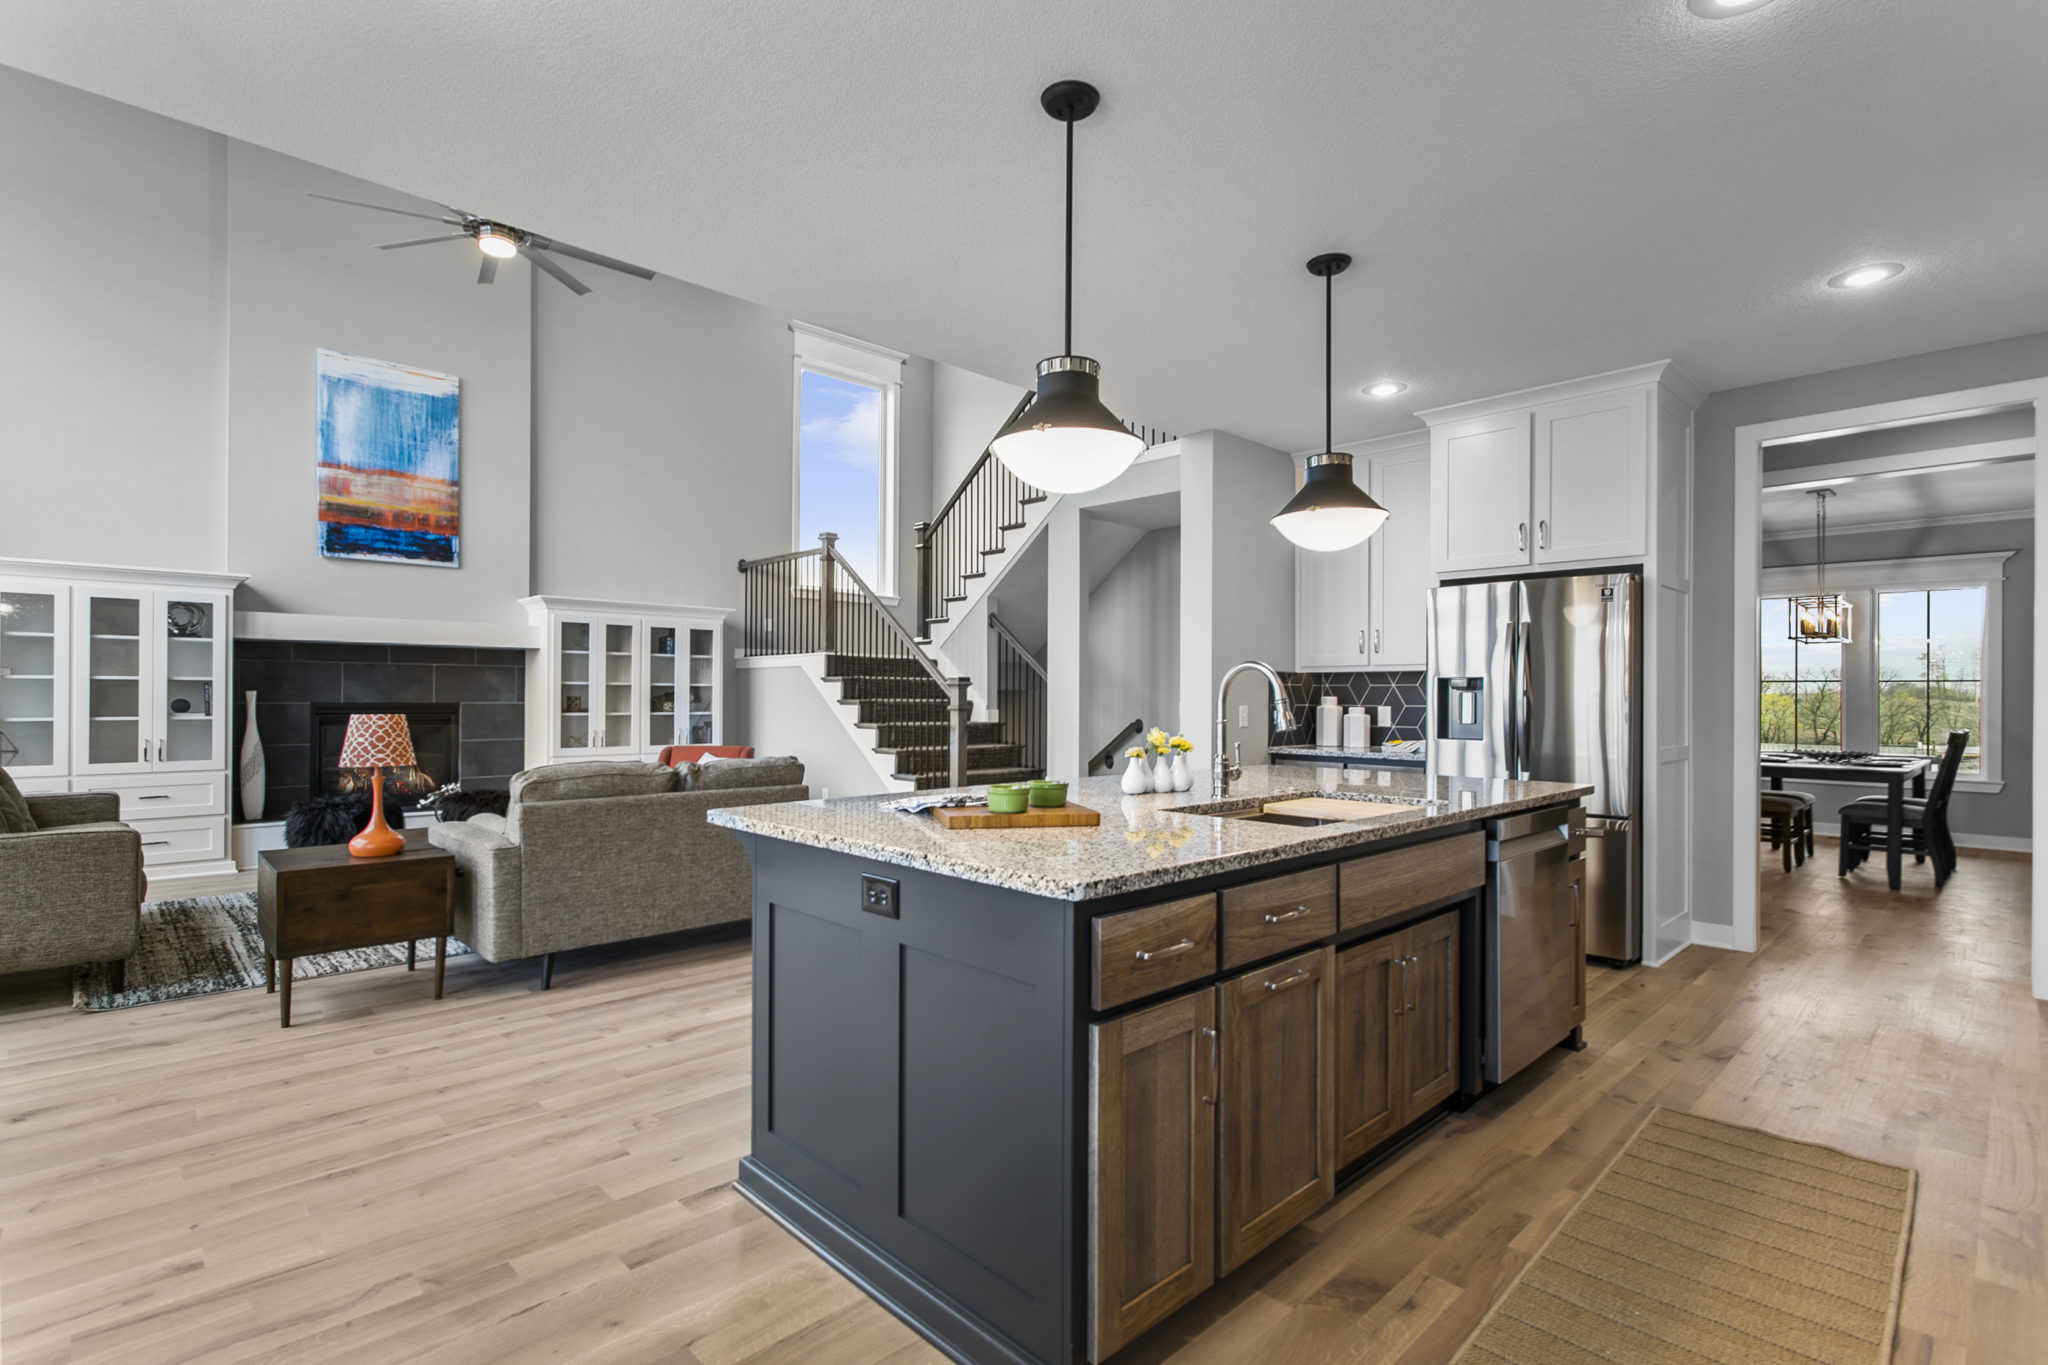 The Jefferson 1.5-story floor plan kitchen opens to the great room.